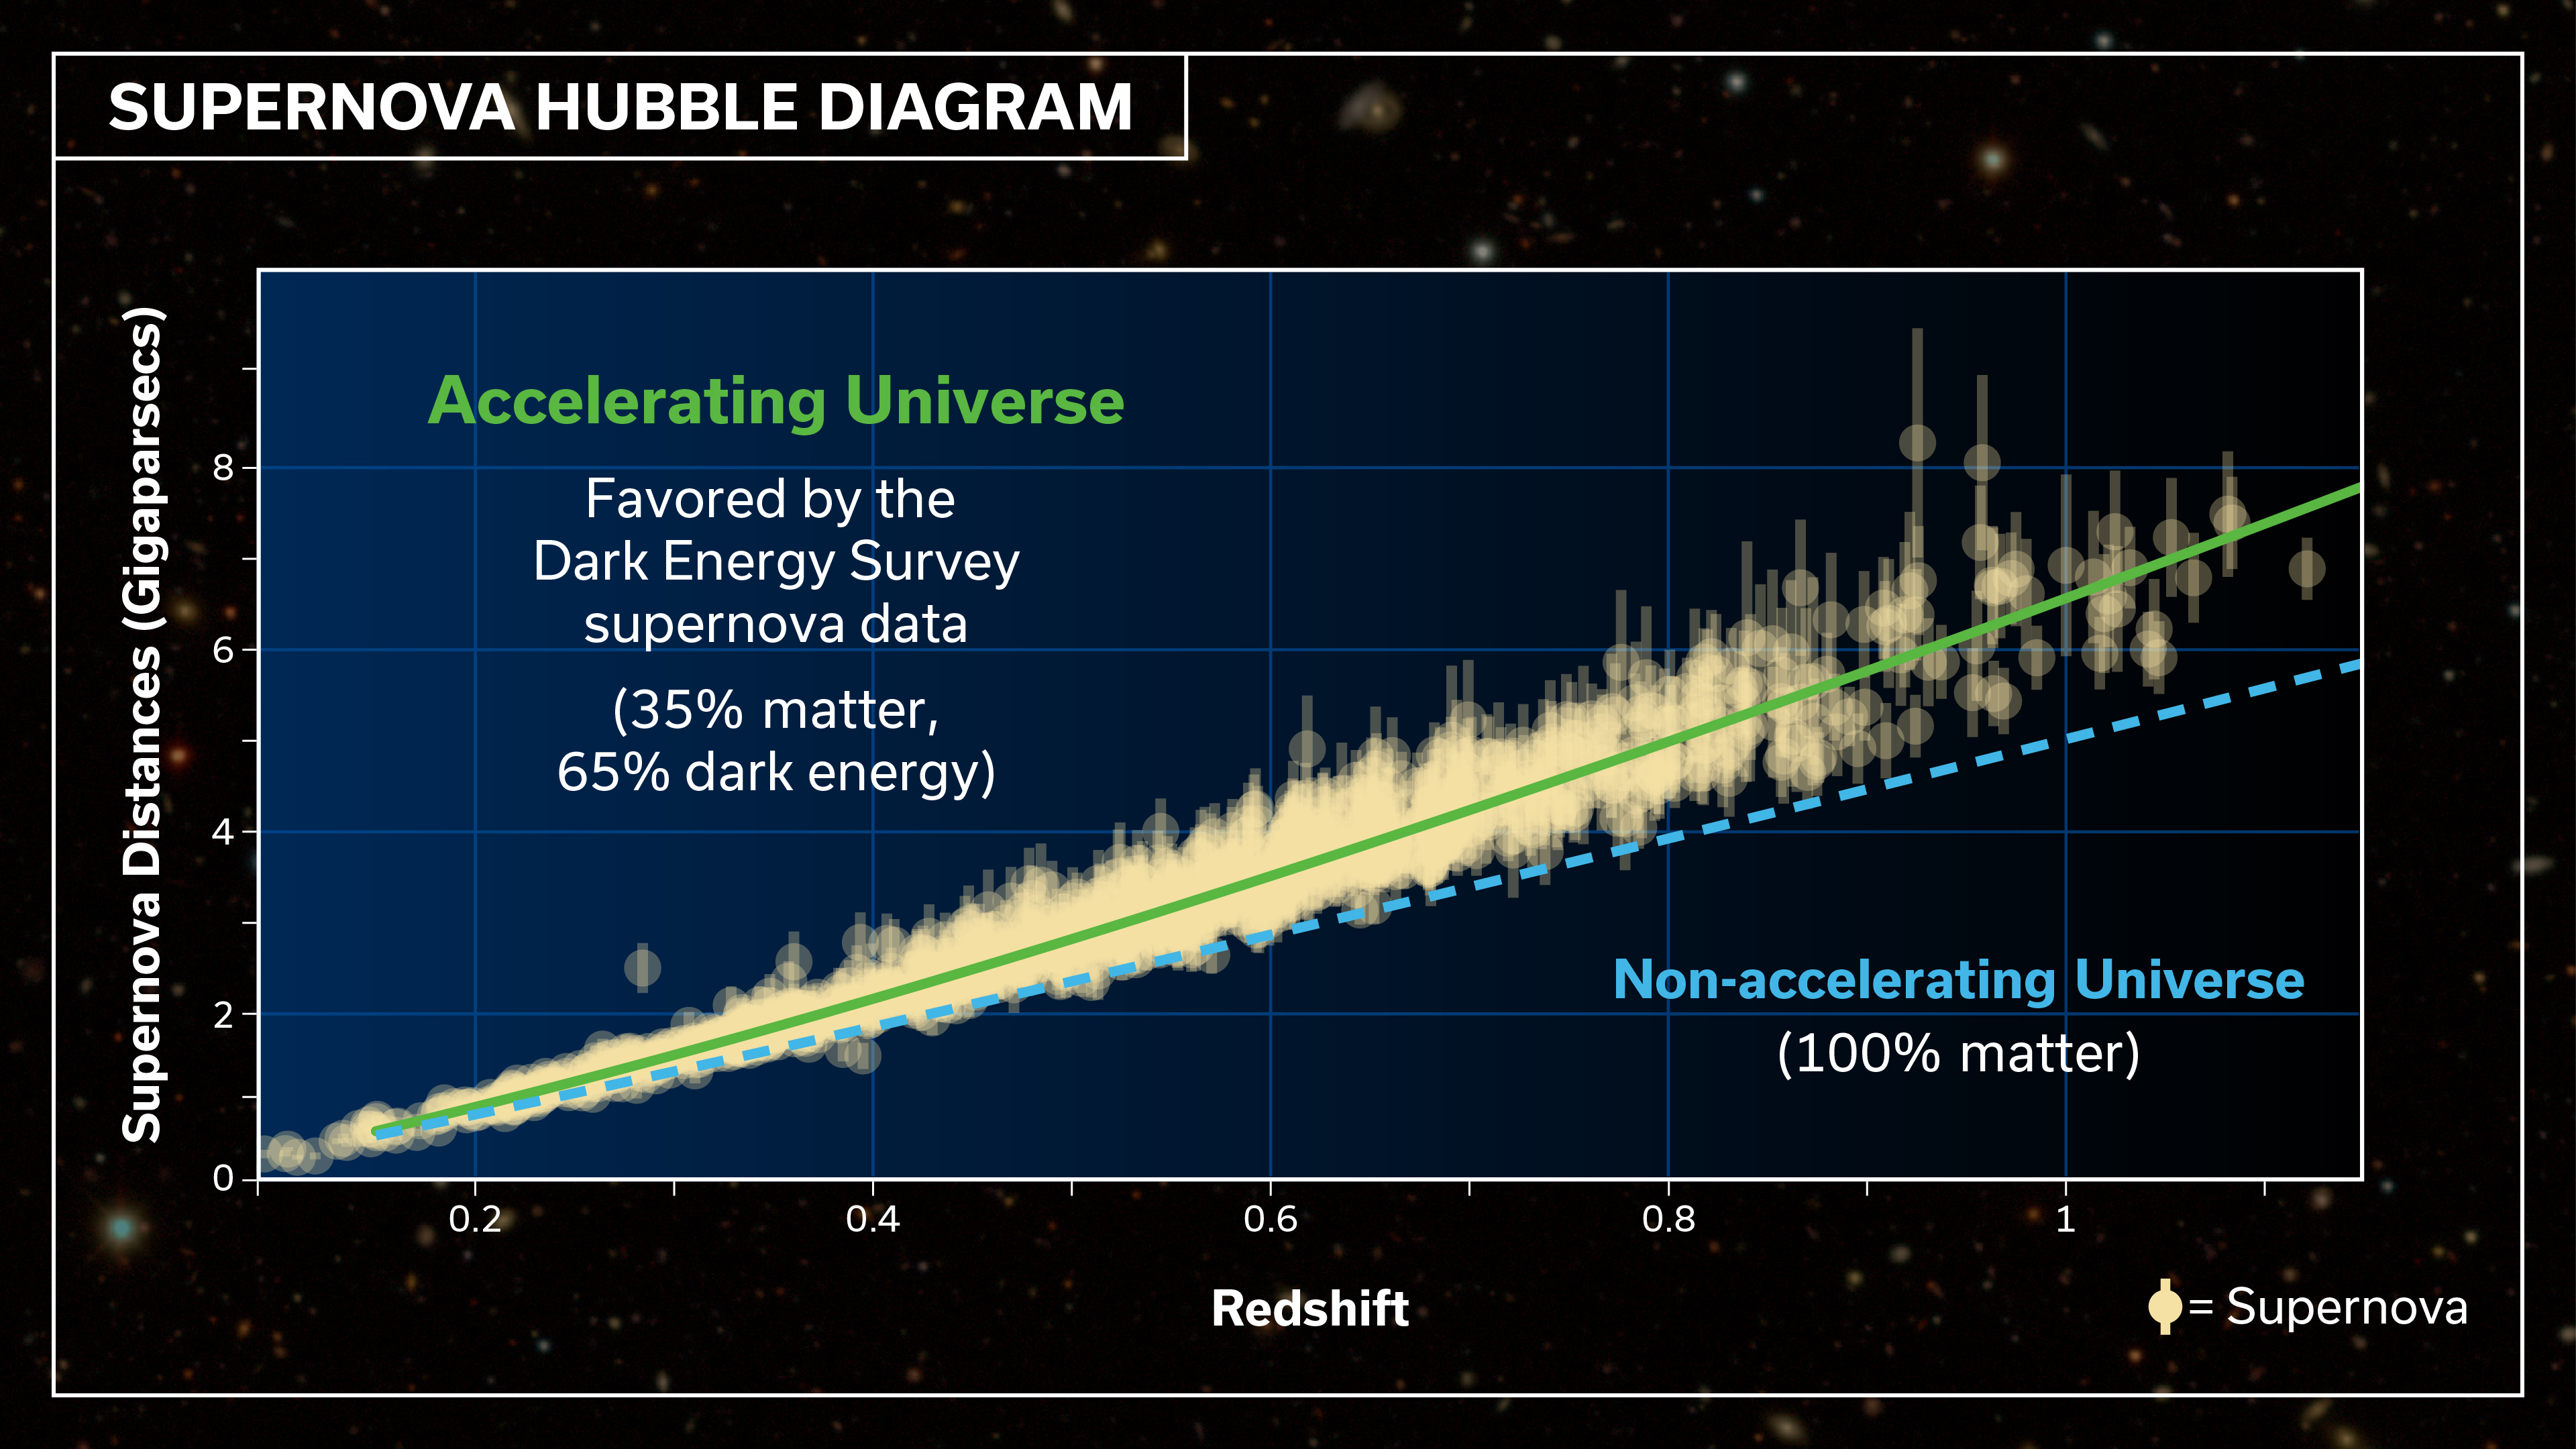 The image displays a "SUPERNOVA HUBBLE DIAGRAM" with supernova data points against a redshift axis, illustrating an accelerating universe model backed by Dark Energy Survey data, overlaid on a starry space background.